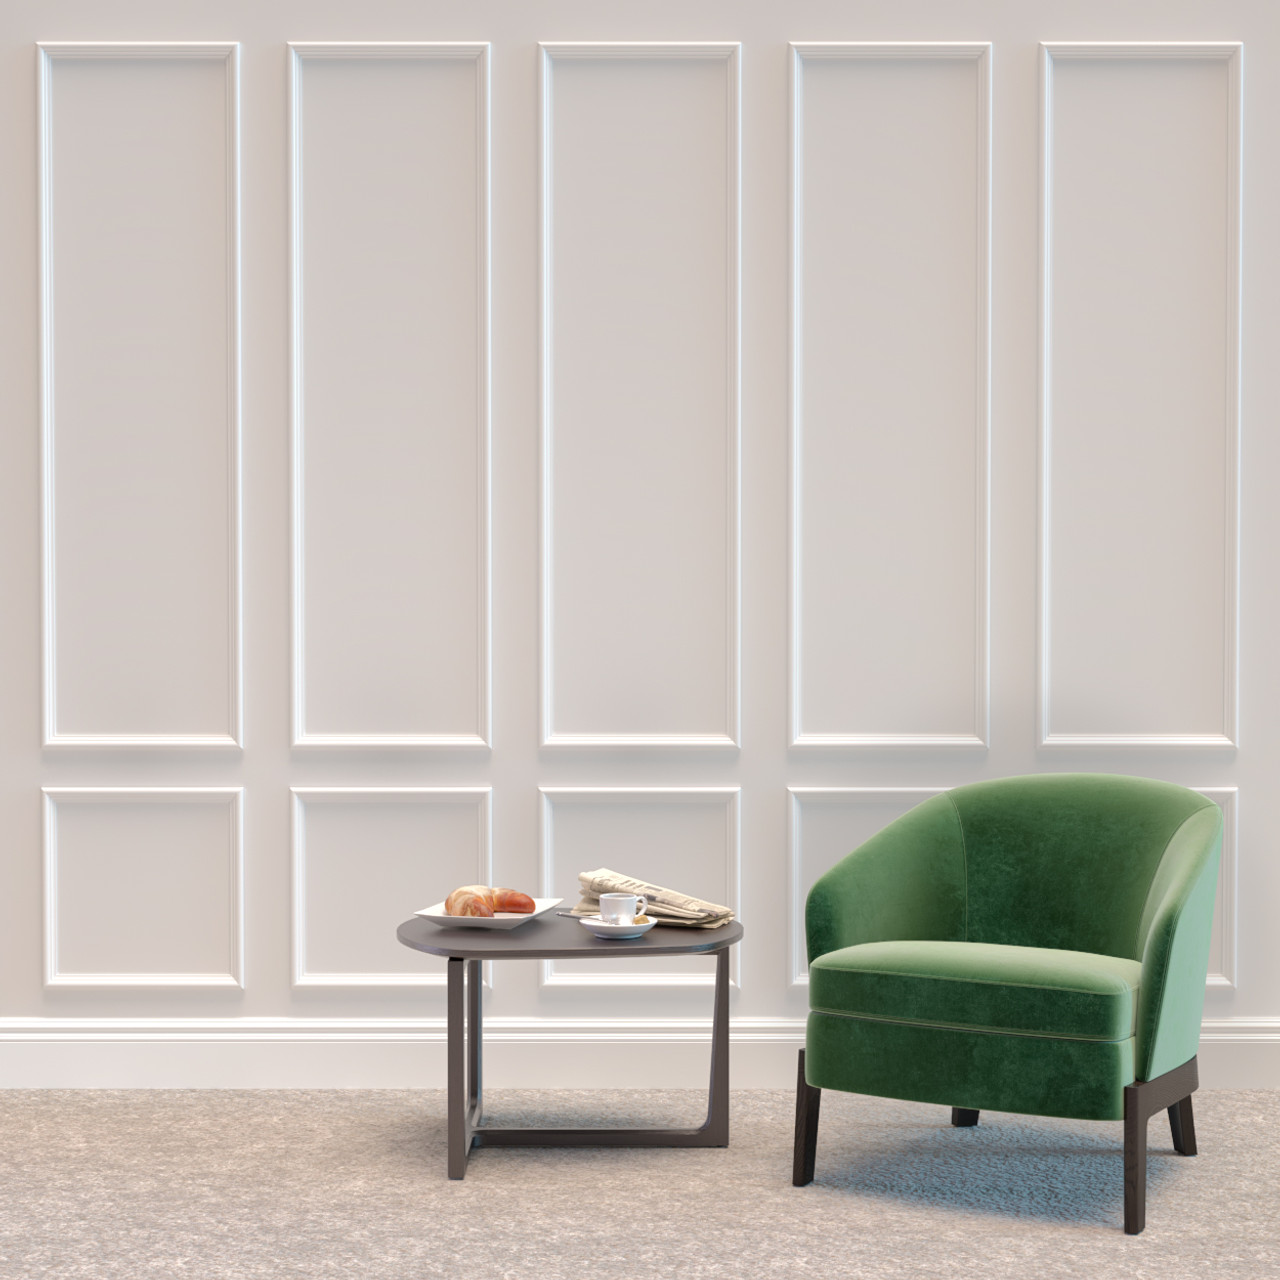 Oxford classic mdf wall panelling kit wainscoting